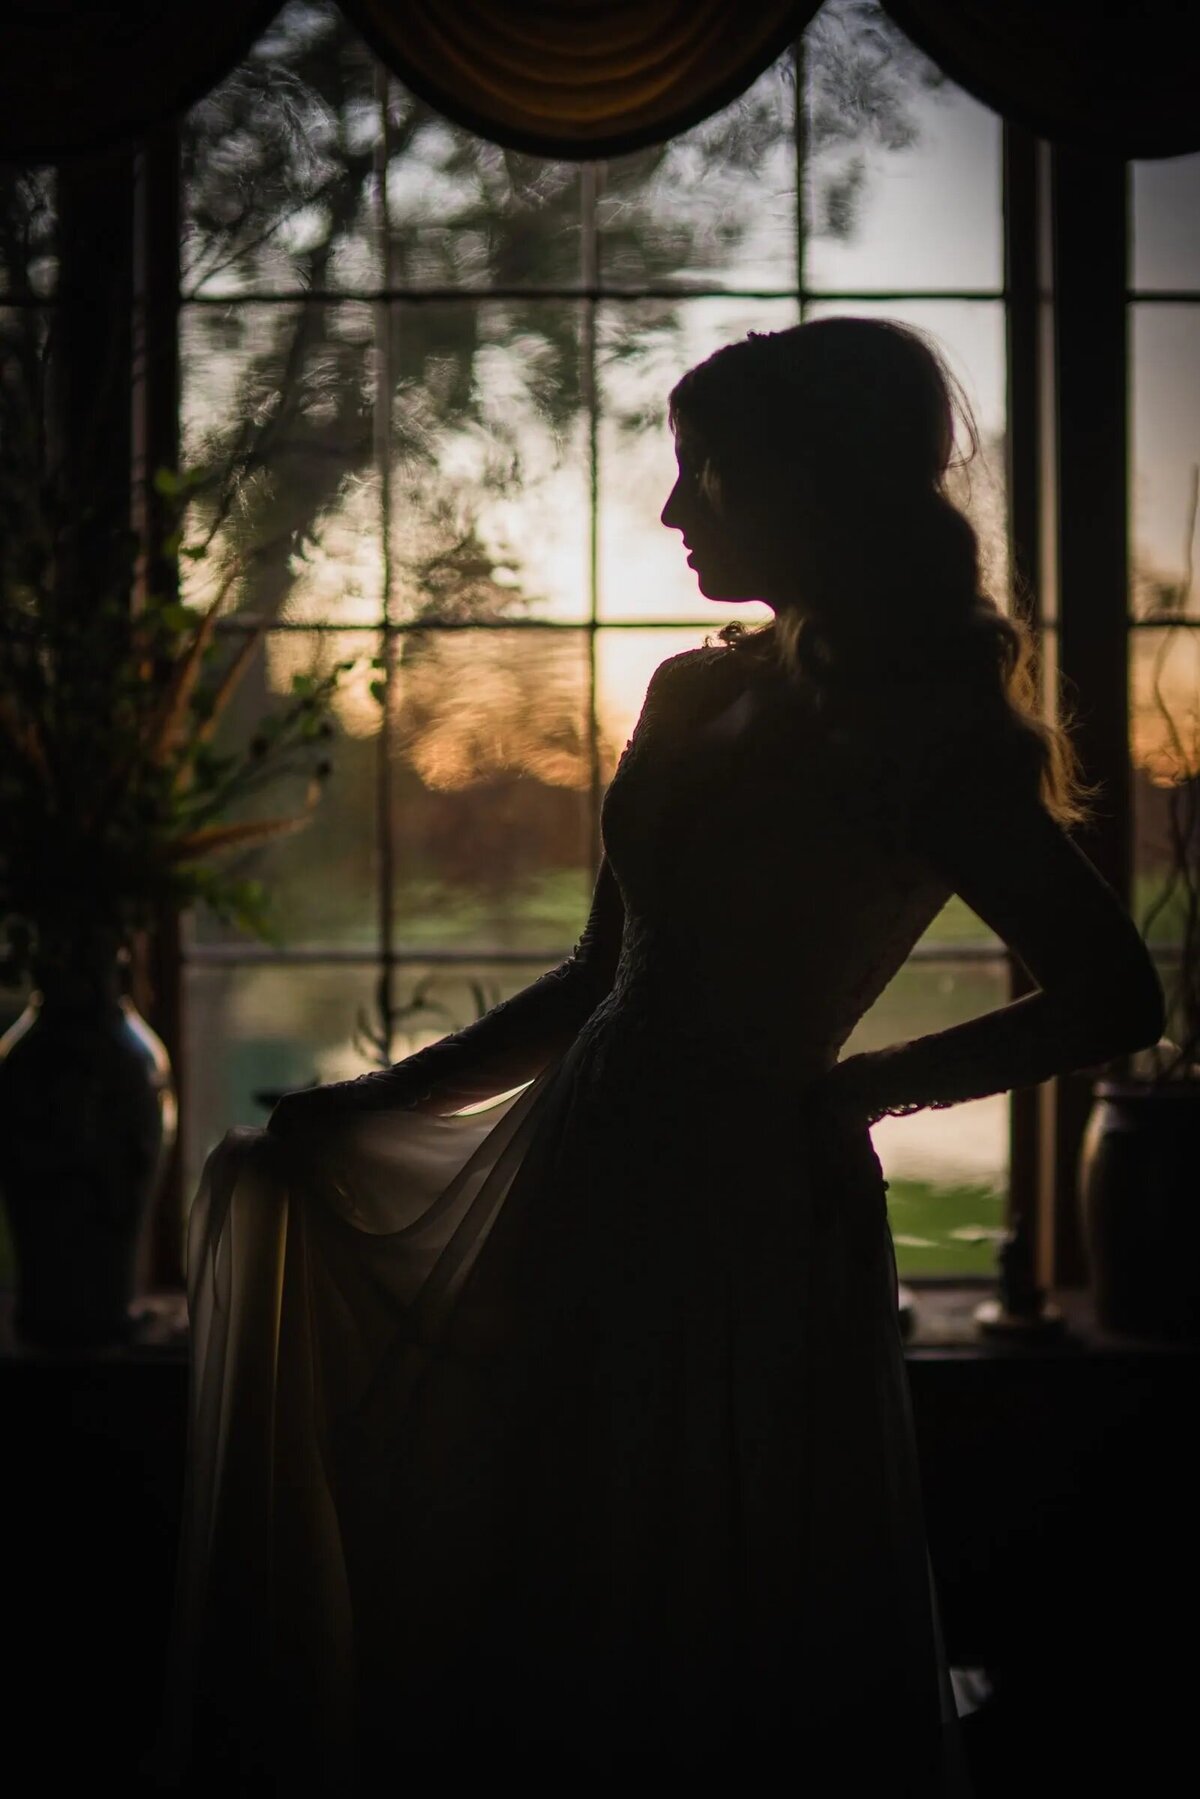 The silhouette of a bride in a window